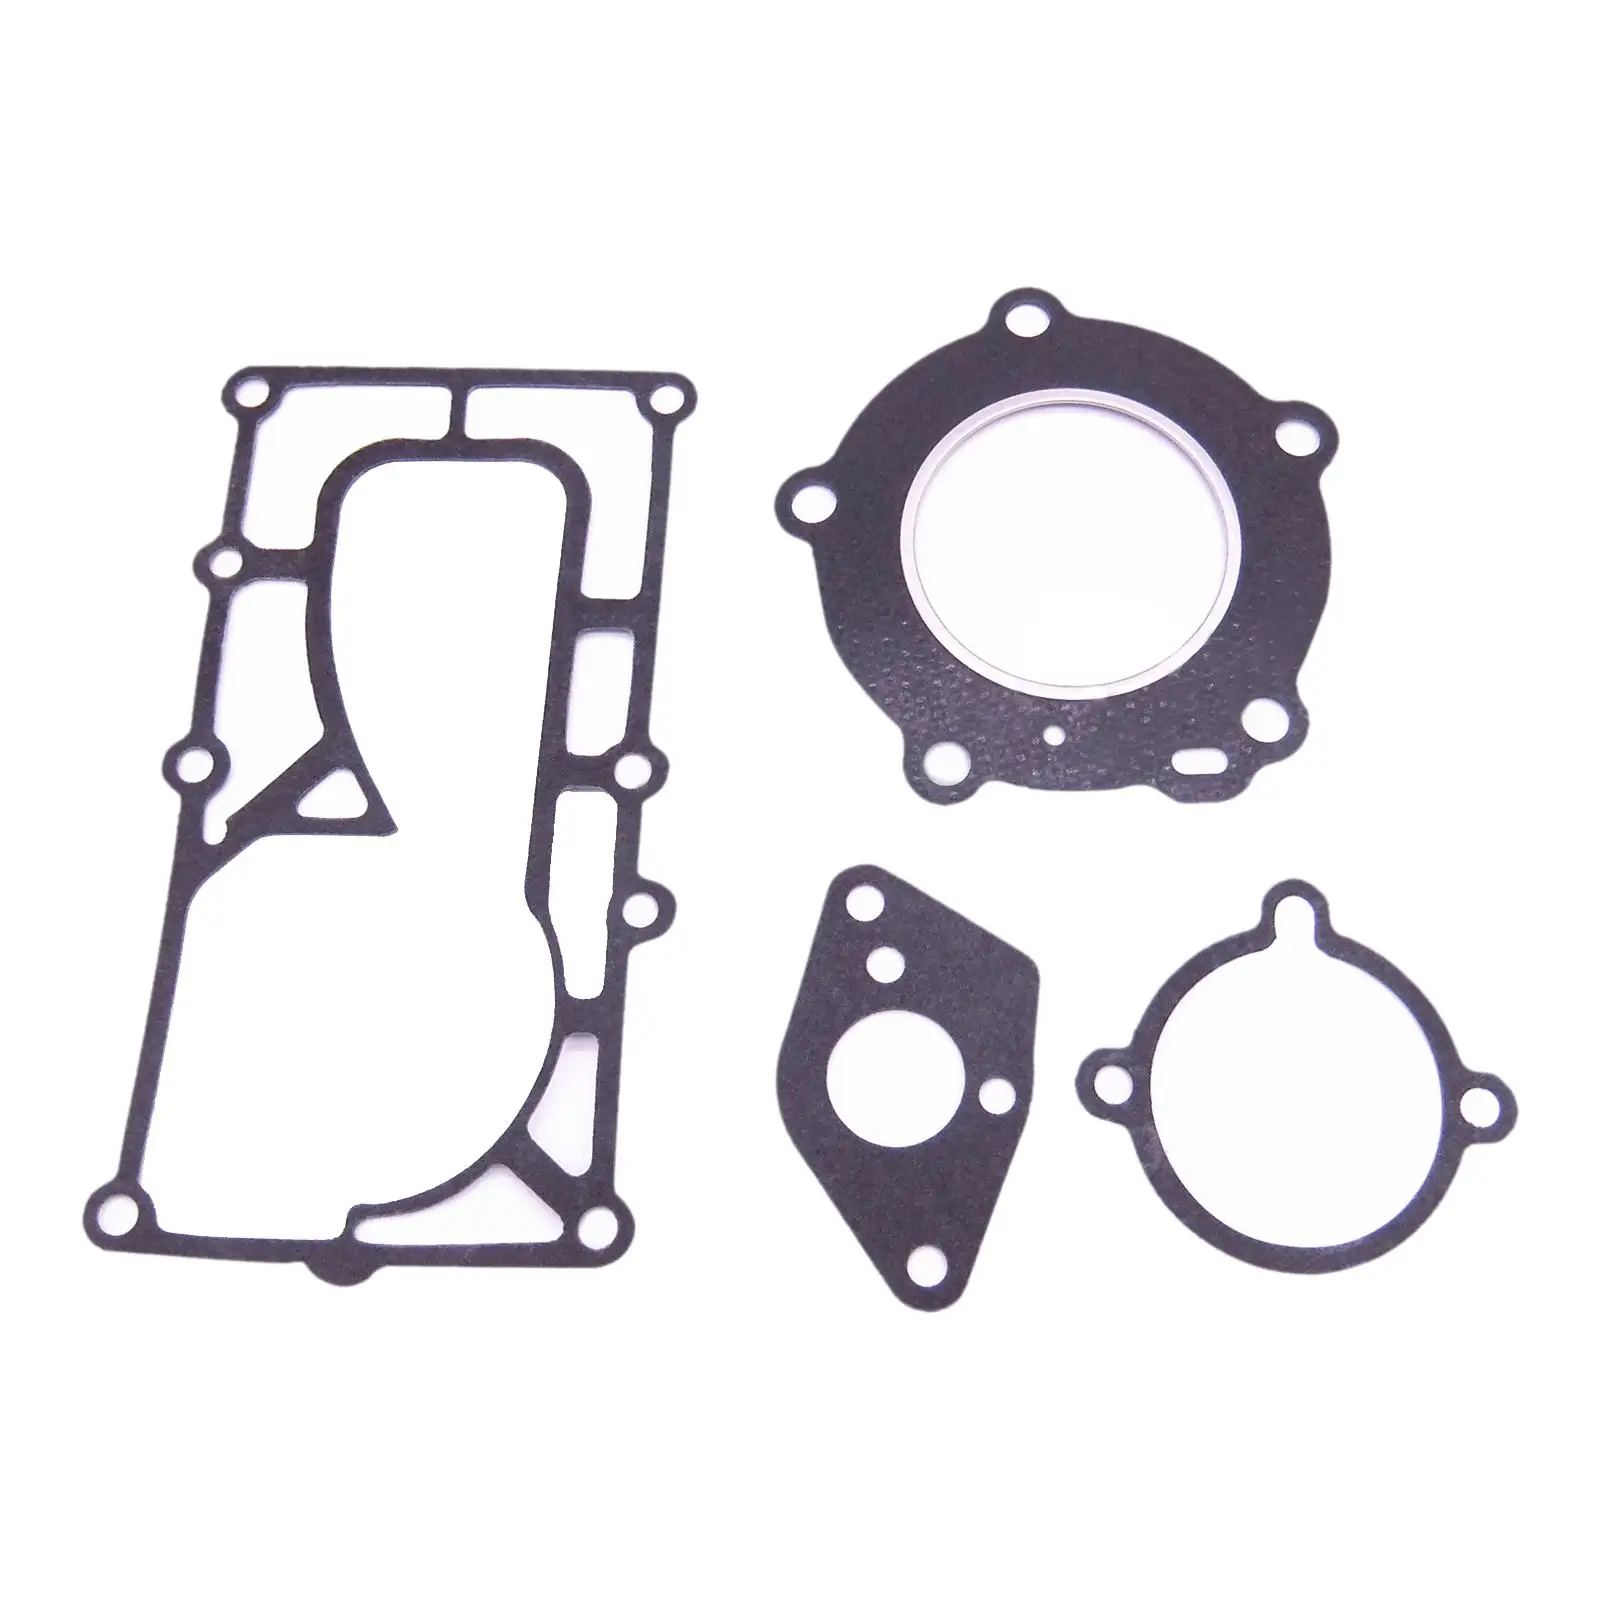 Seal Gasket Kit, 369-02011-0 36961-0120M, 369020M, 36901-0051M, 36901-2140M, 369-01005-1 Boat for 4HP 5HP Outboard Engine